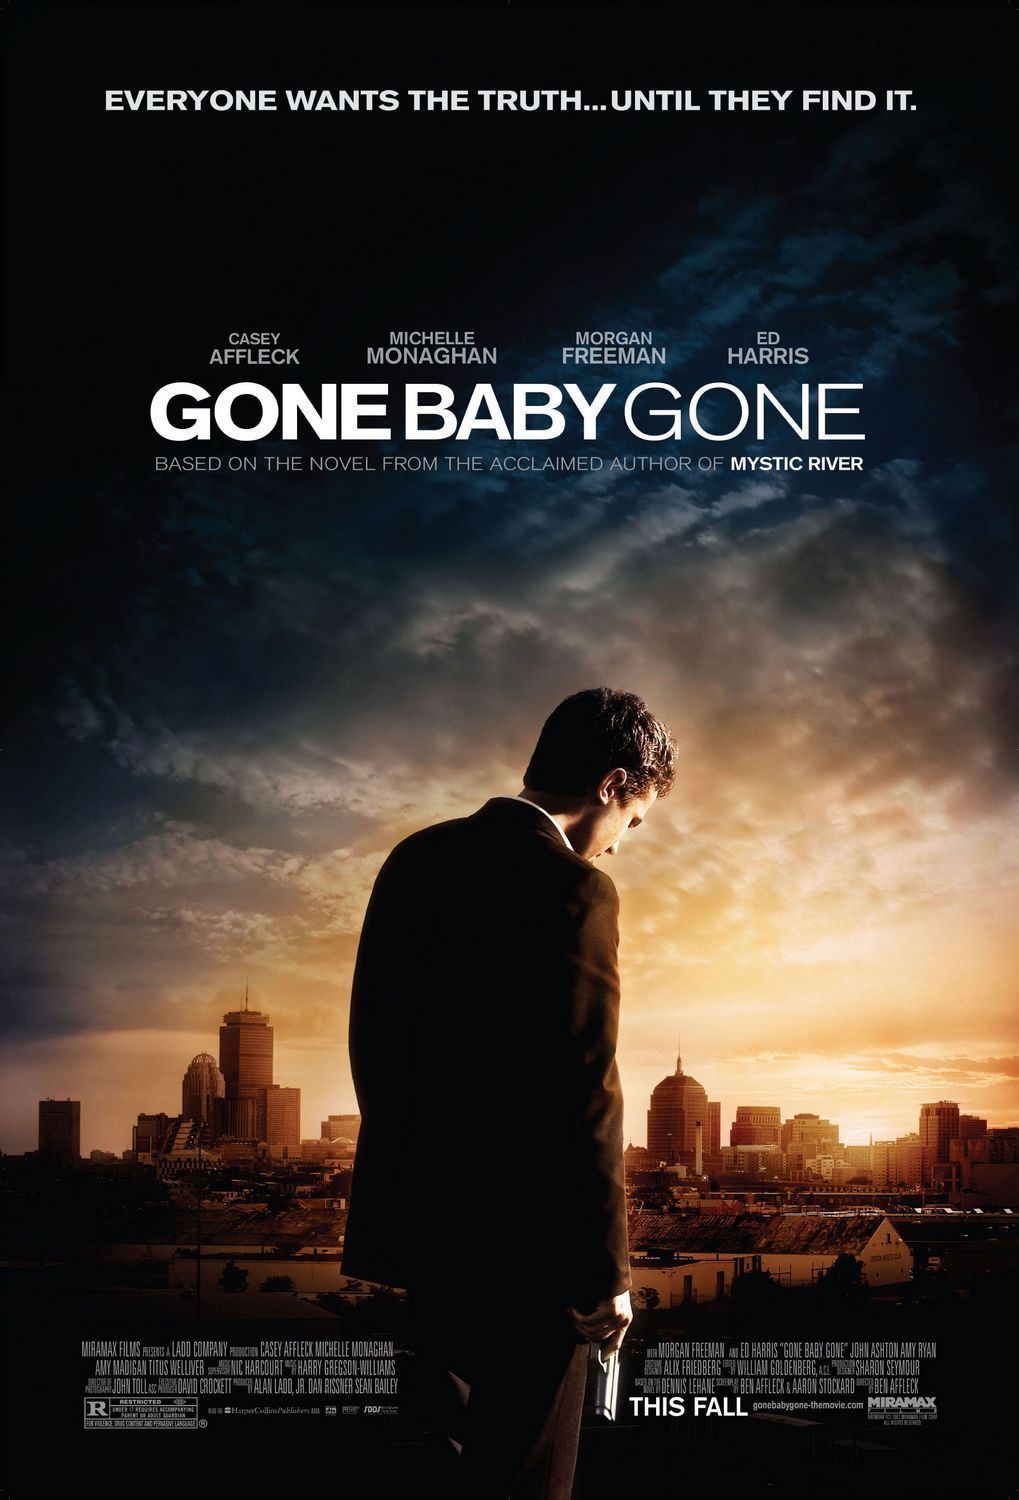 Primal Fears: Revisiting “Gone Baby Gone”